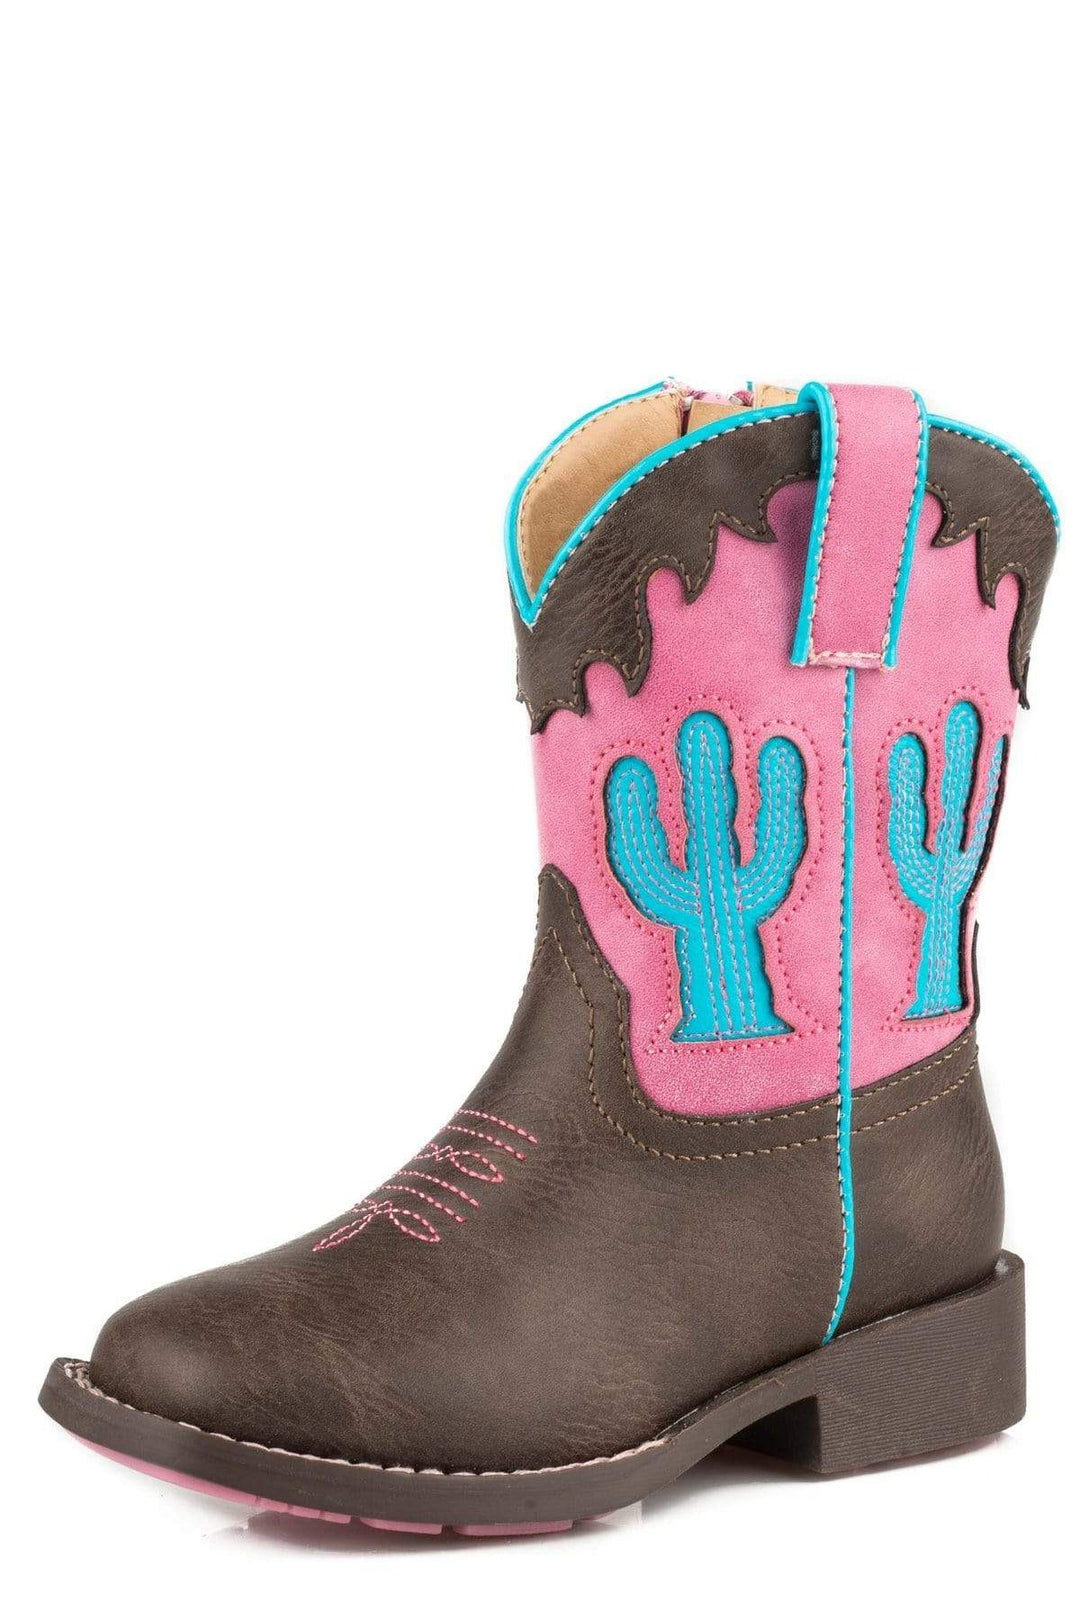 Roper Kids Boots & Shoes Roper Toddler Cactus Boots (17226034)